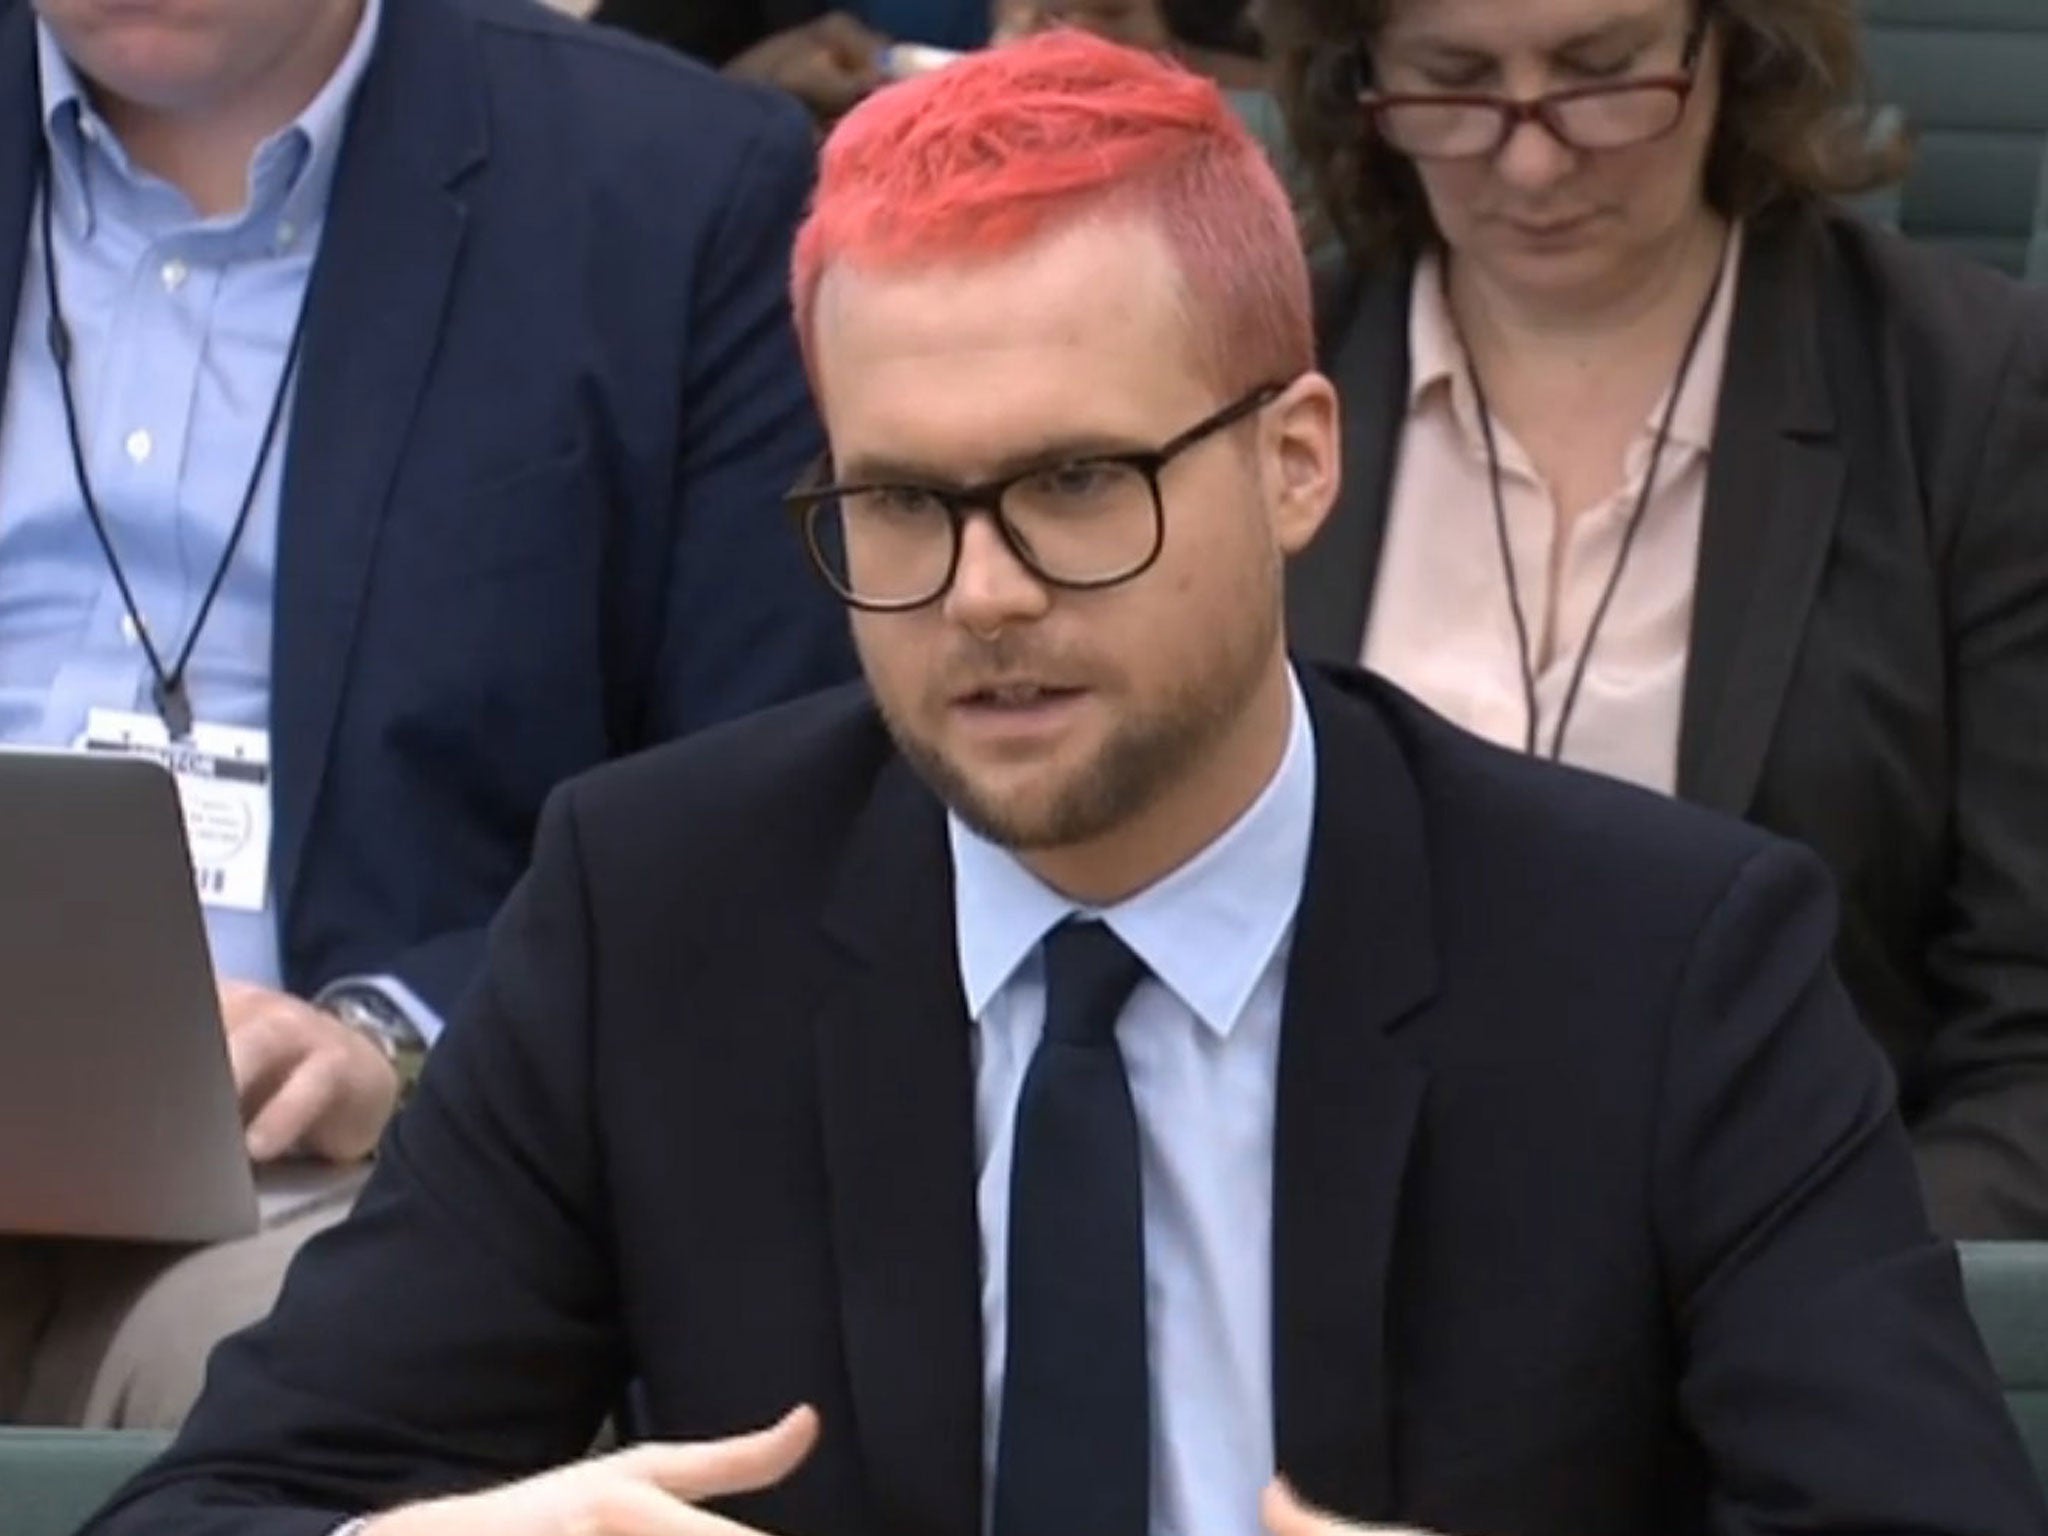 Cambridge Analytica whistleblower Christopher Wylie gives evidence to the House of Commons Digital, Culture, Media and Sport Committee's inquiry into fake news